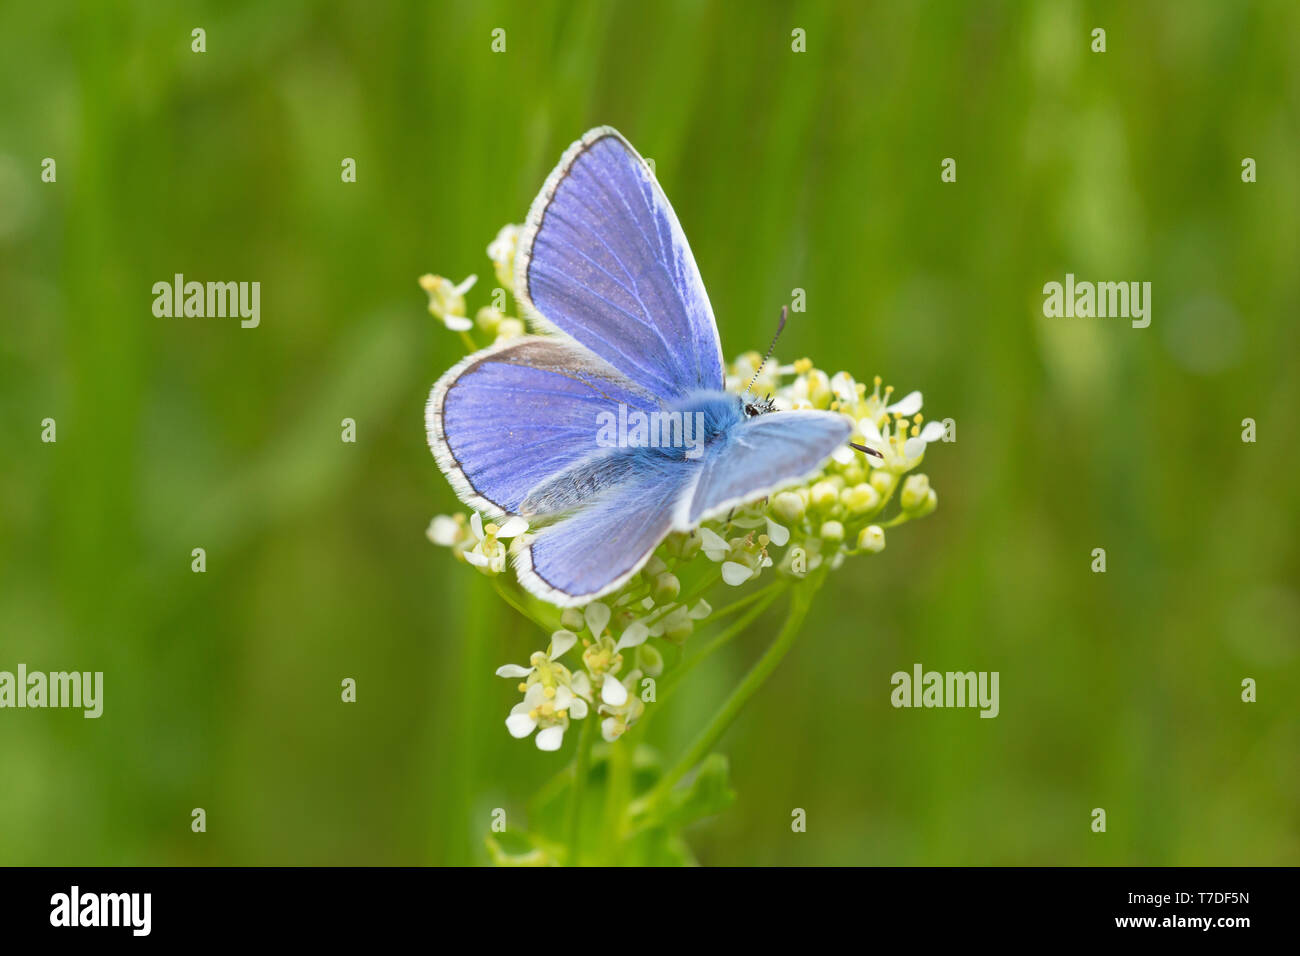 blue butterfly on white flower in green grass Stock Photo